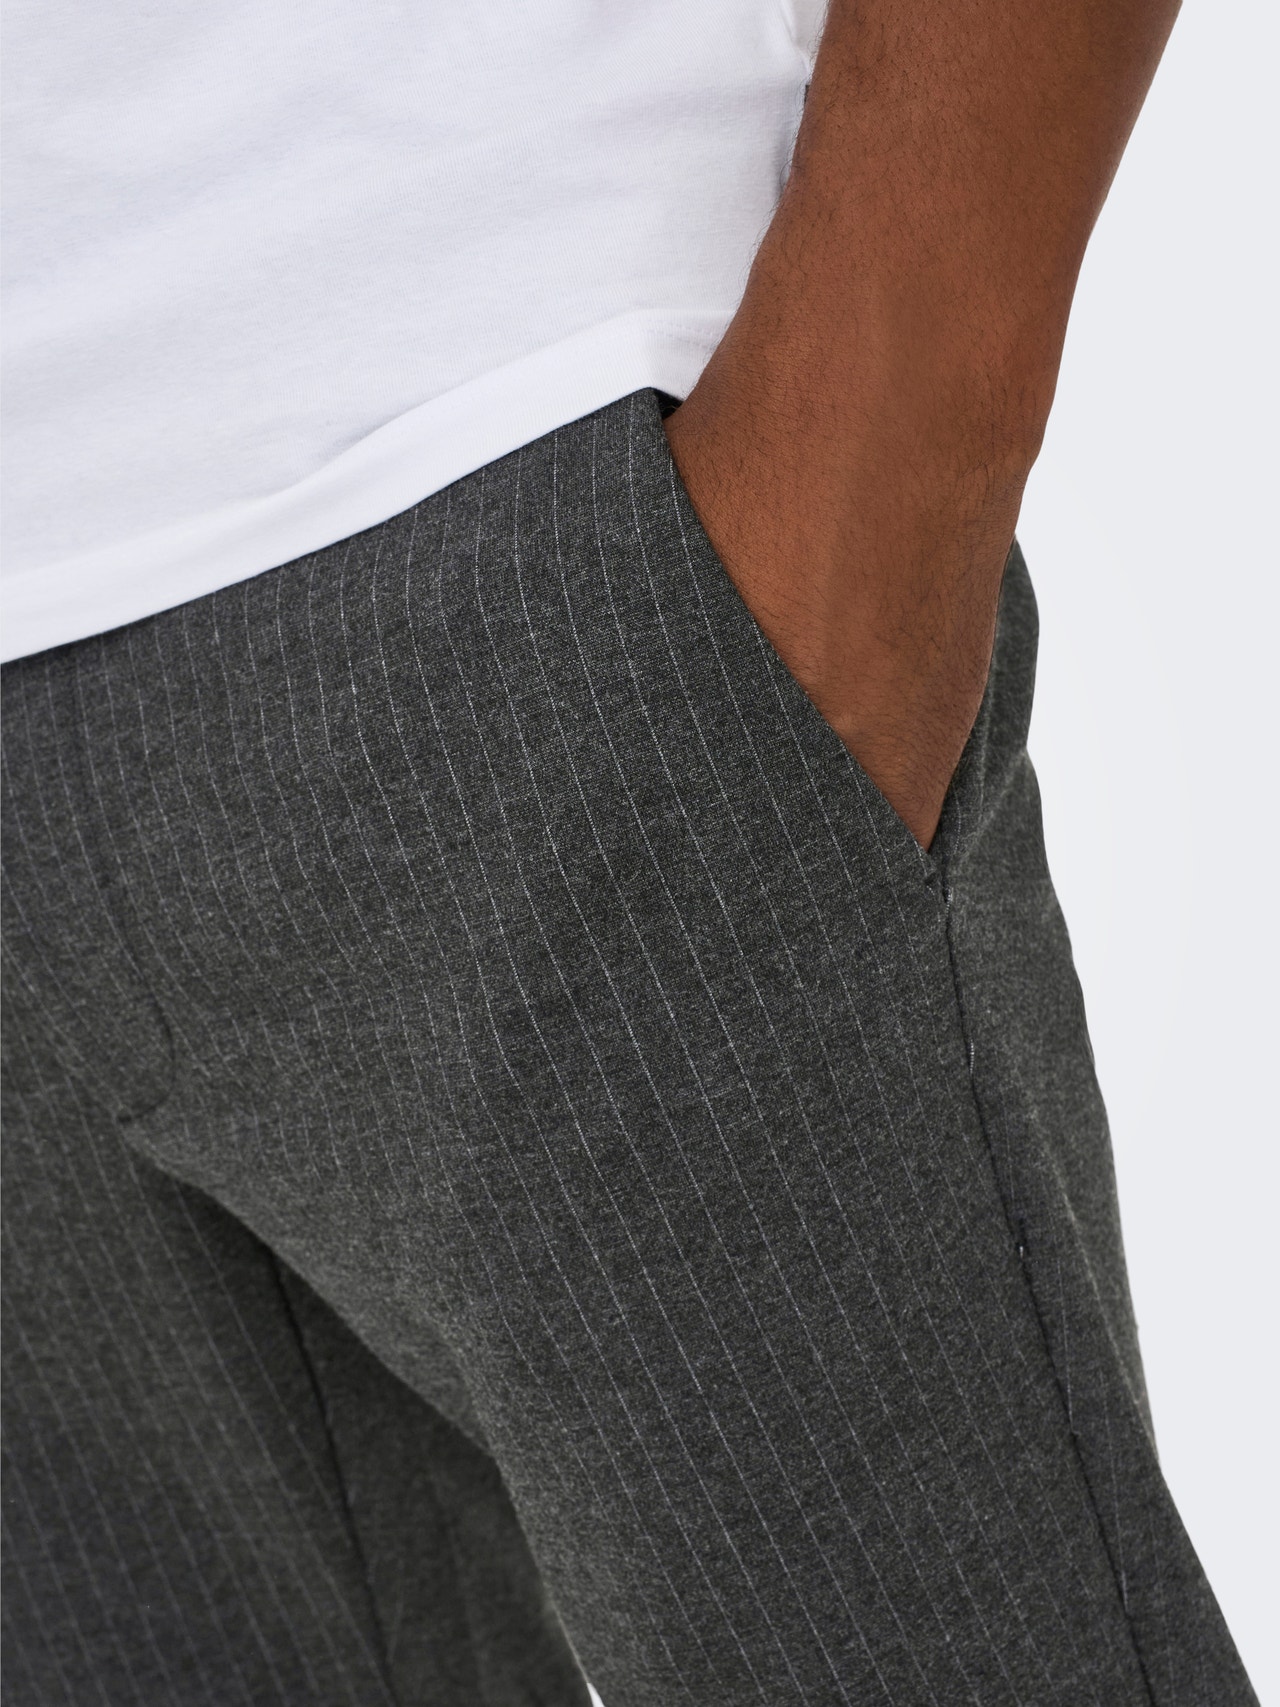 ONLY & SONS Classic striped trousers -Dark Grey Melange - 22013727